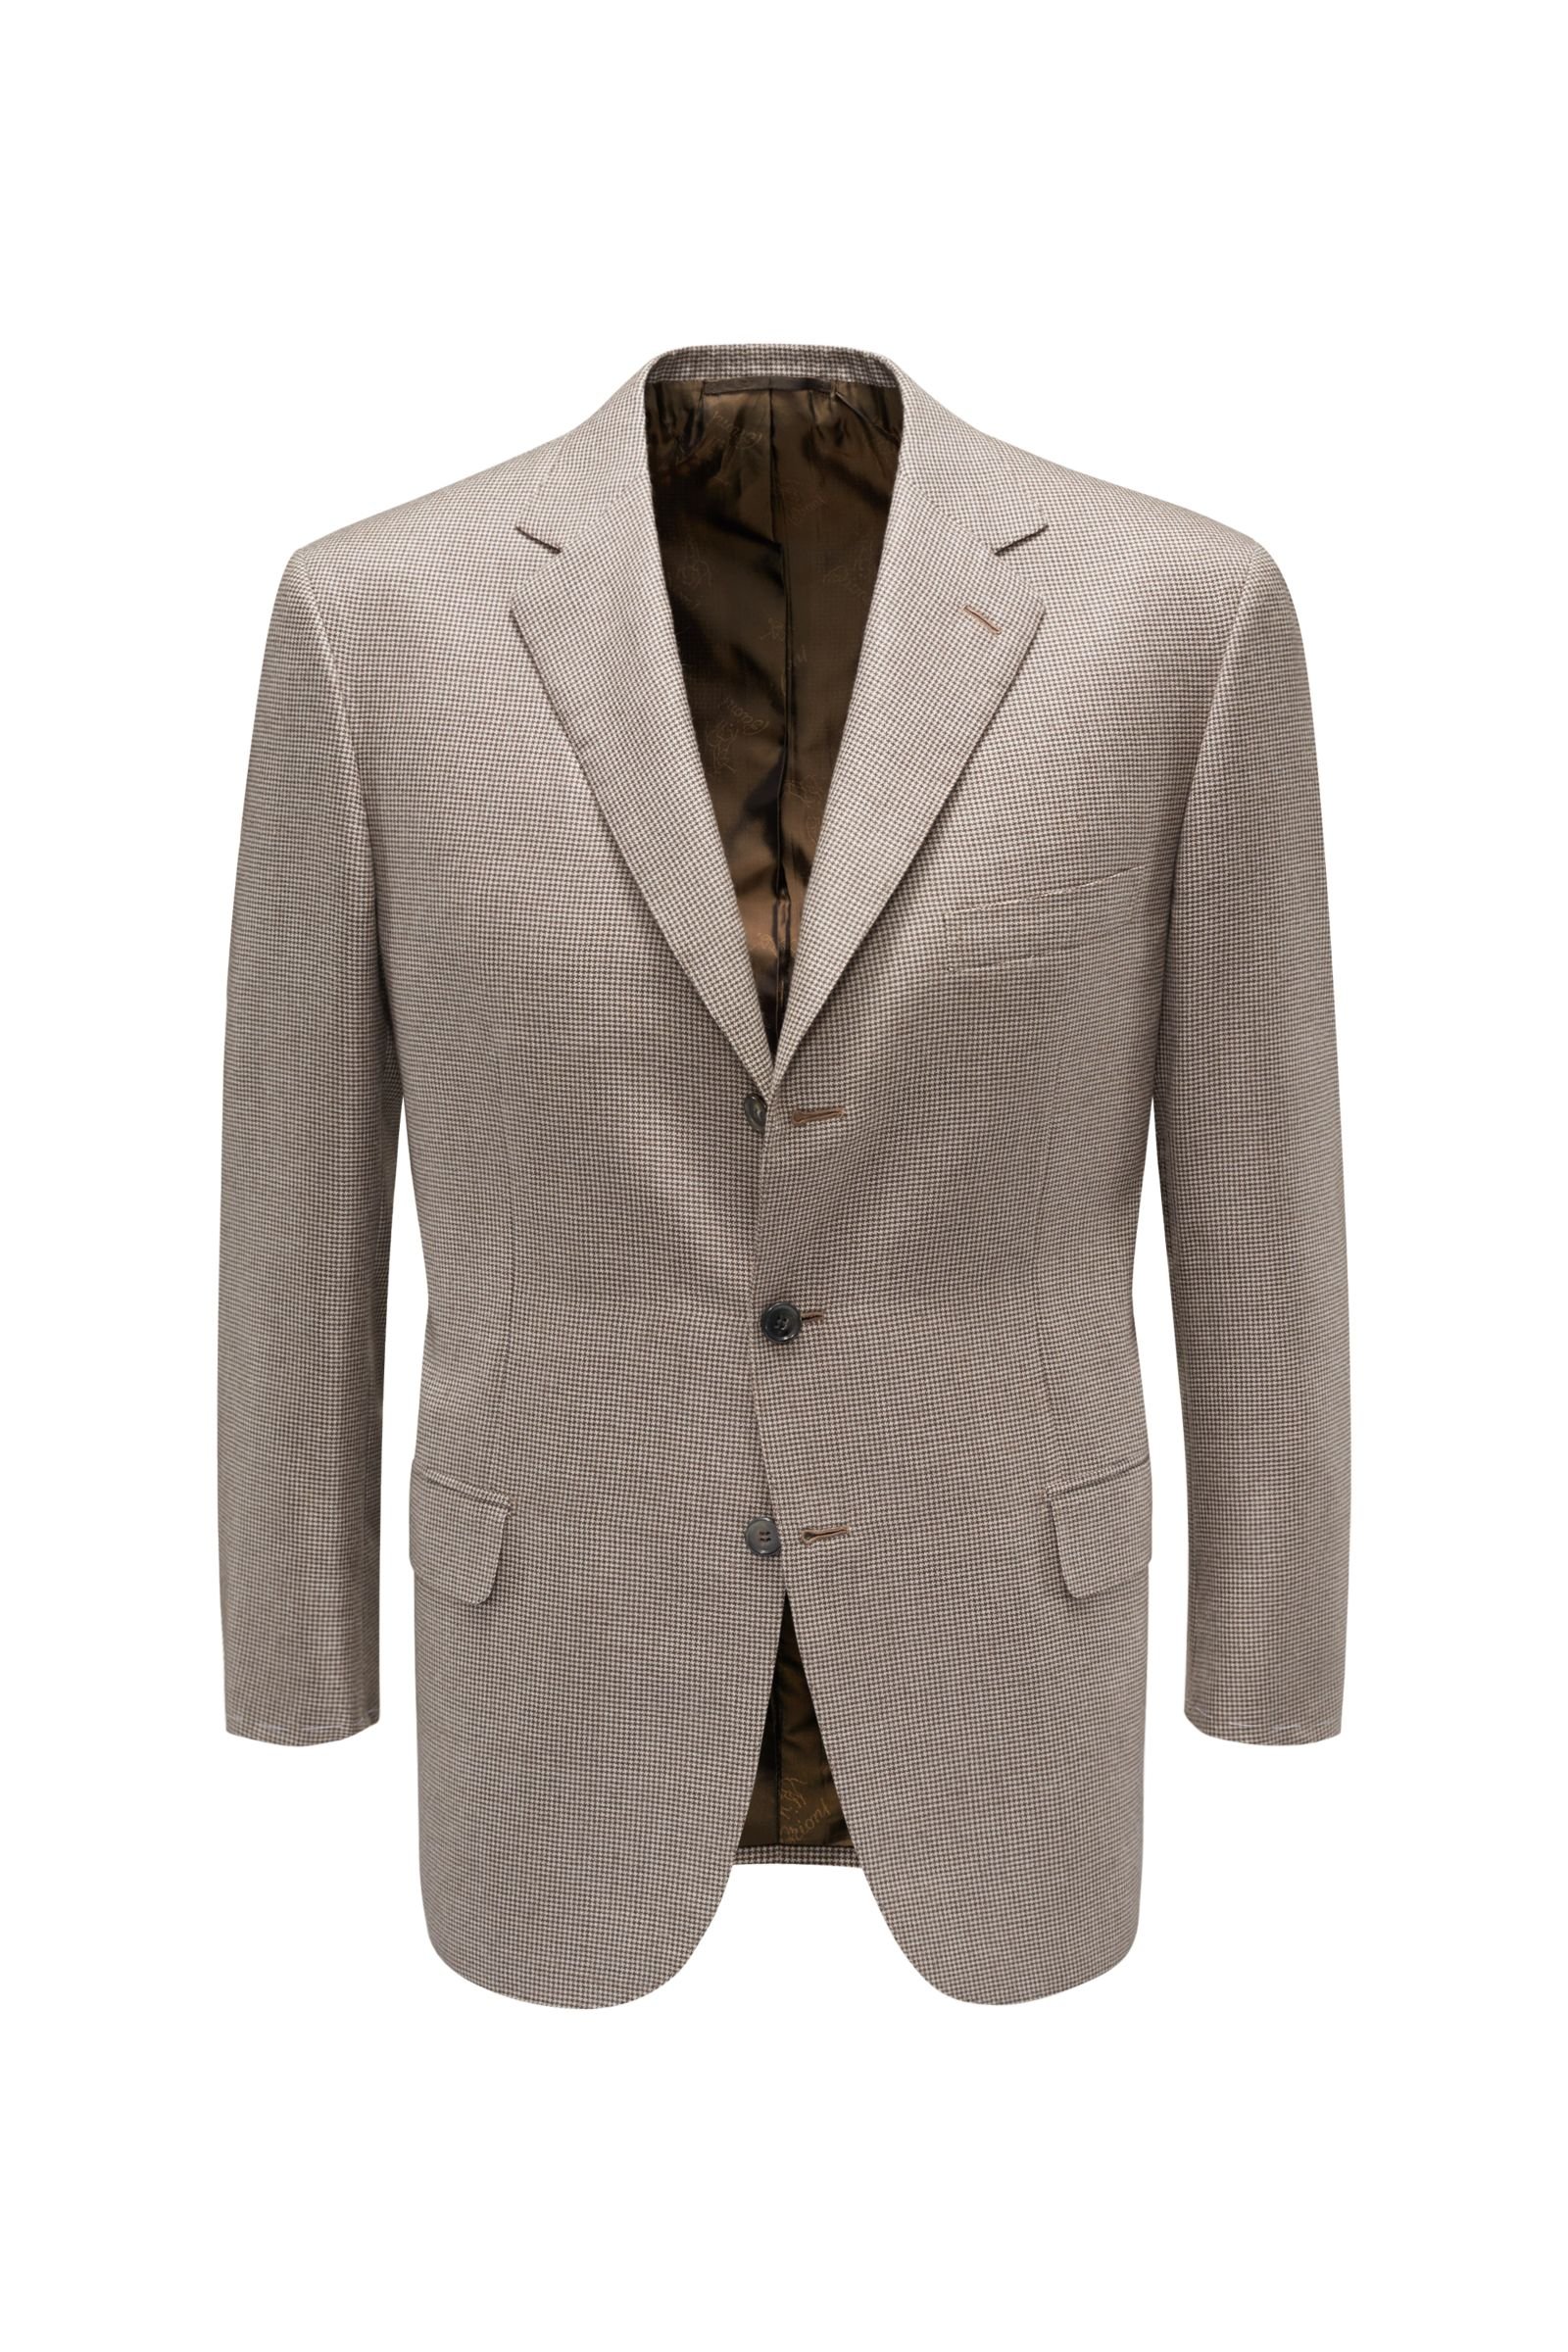 Smart-casual jacket 'Colosseo' light brown patterned